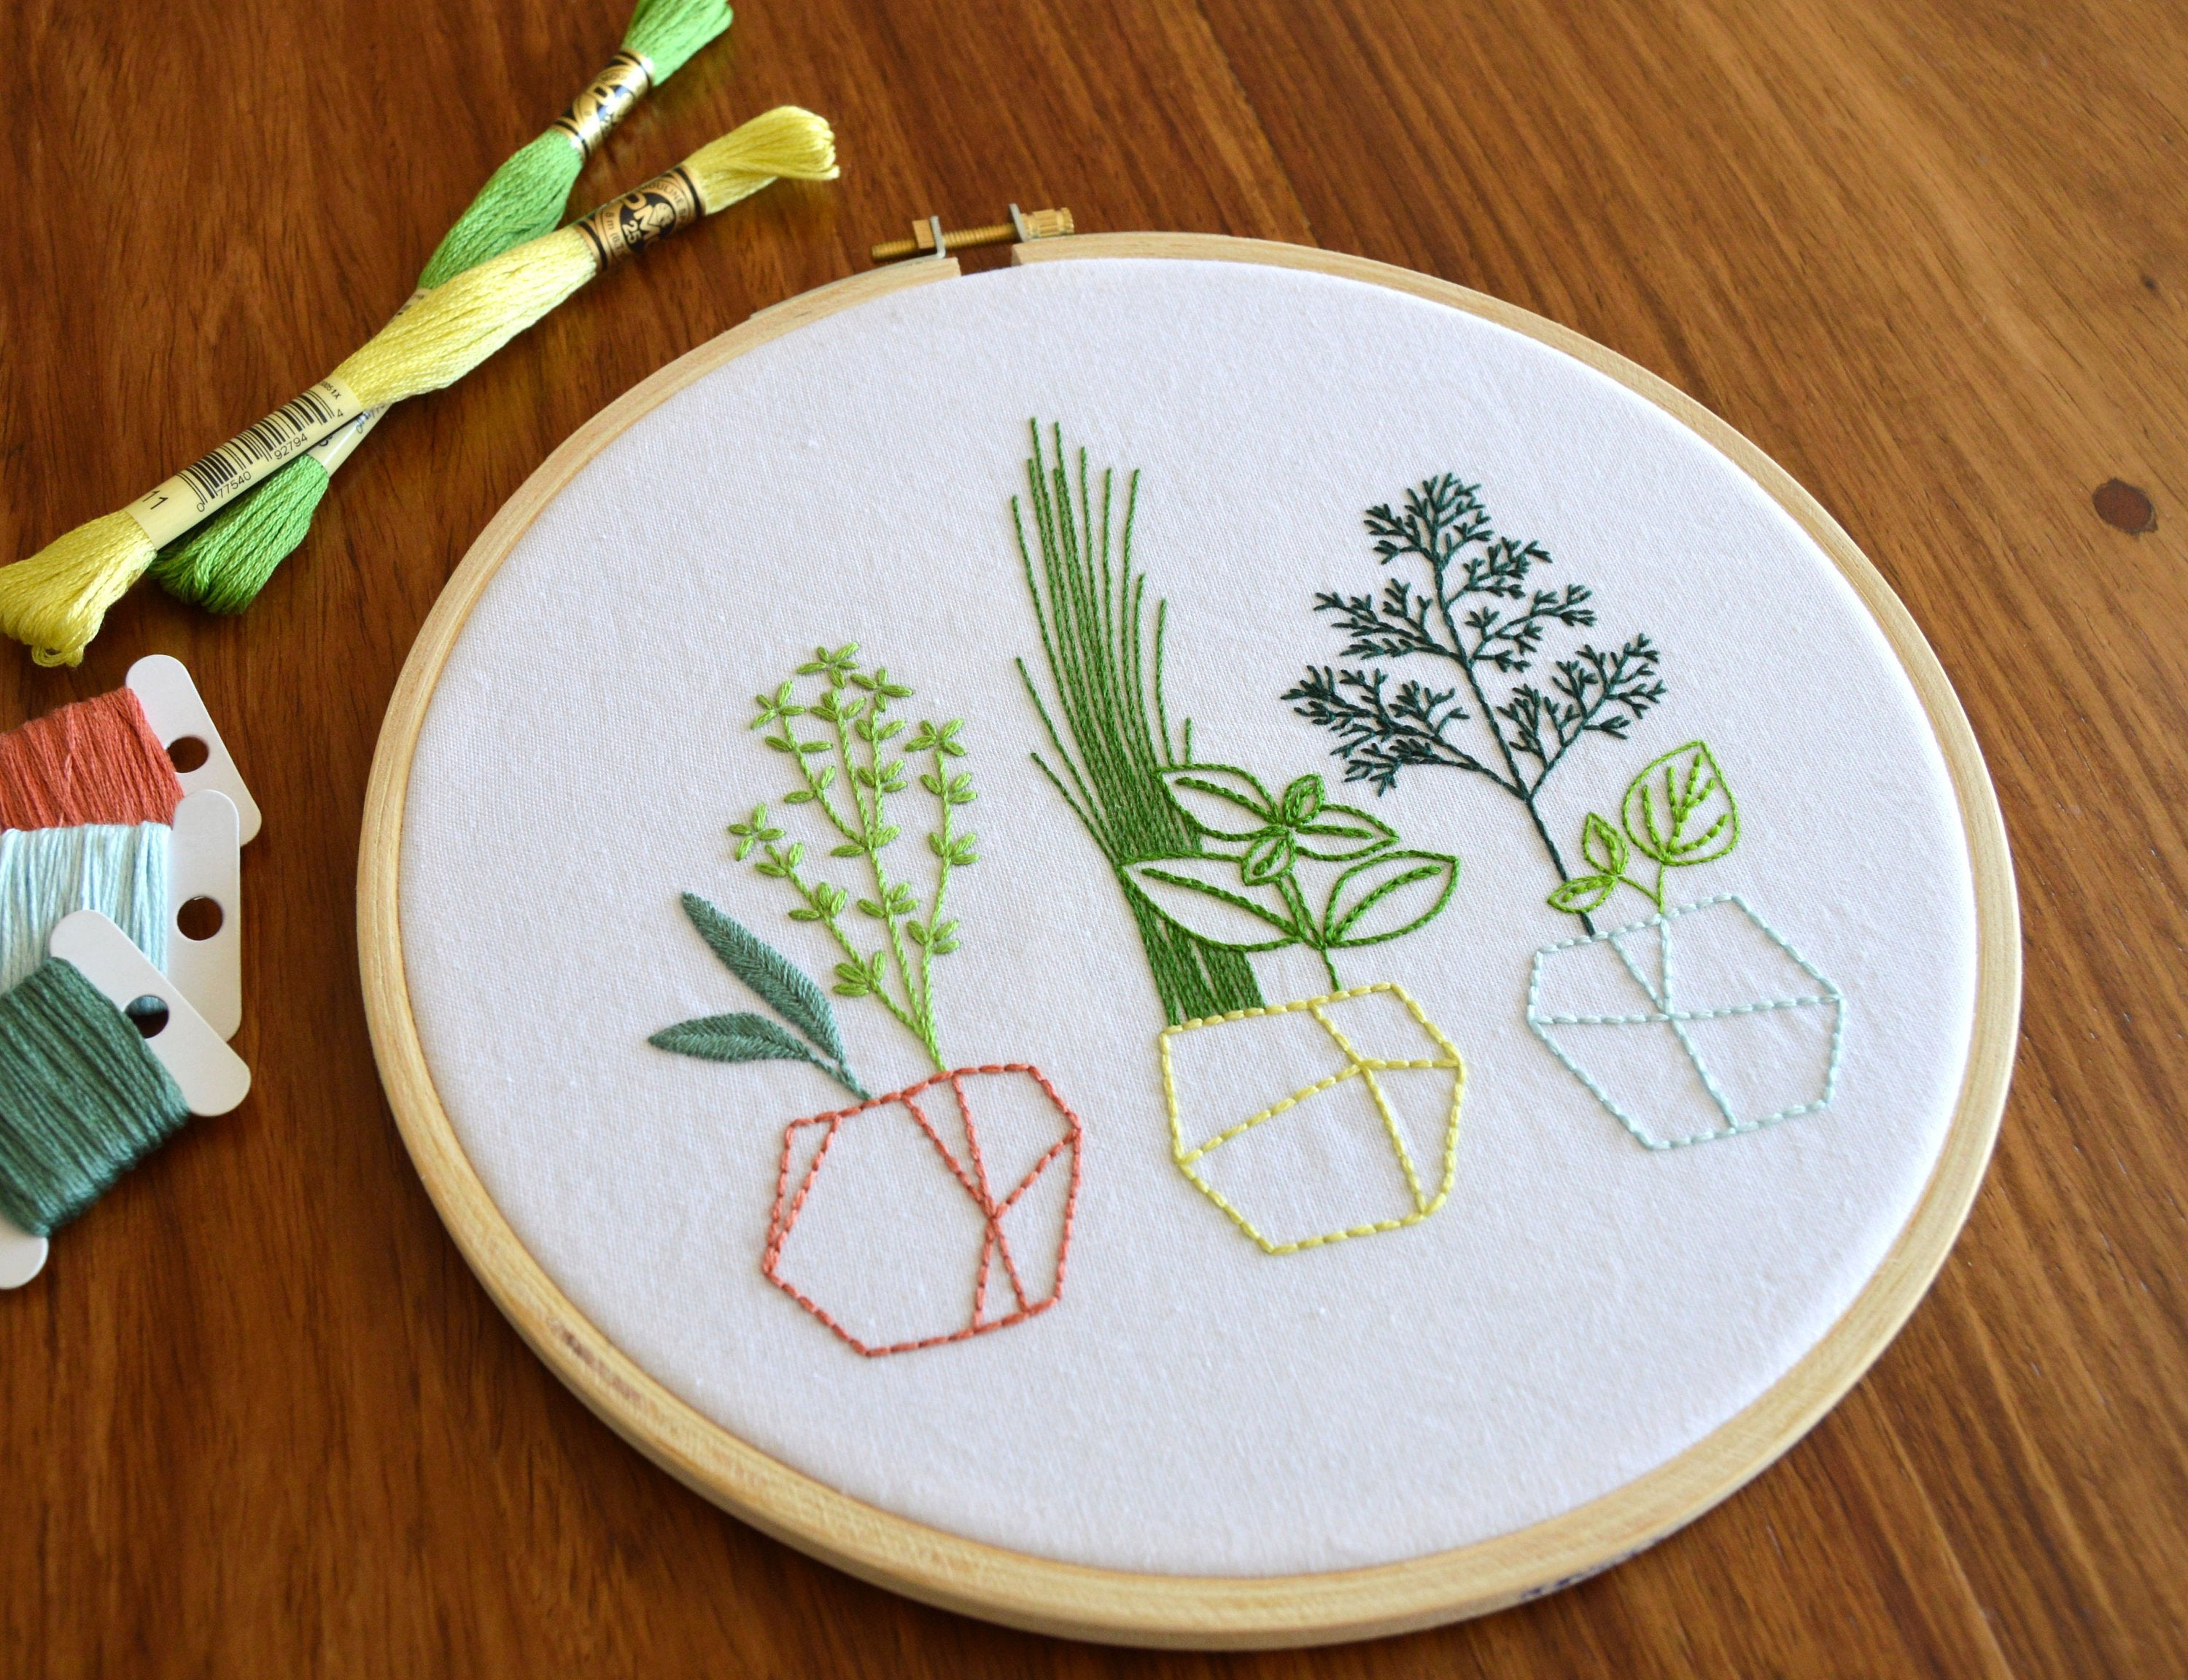 Herb Embroidery Patterns Herb Pots Hand Embroidery Pattern Modern Embroidery Plants House Plants Vegetable Garden Herbs Embroidered Plants Embroidery Patterns